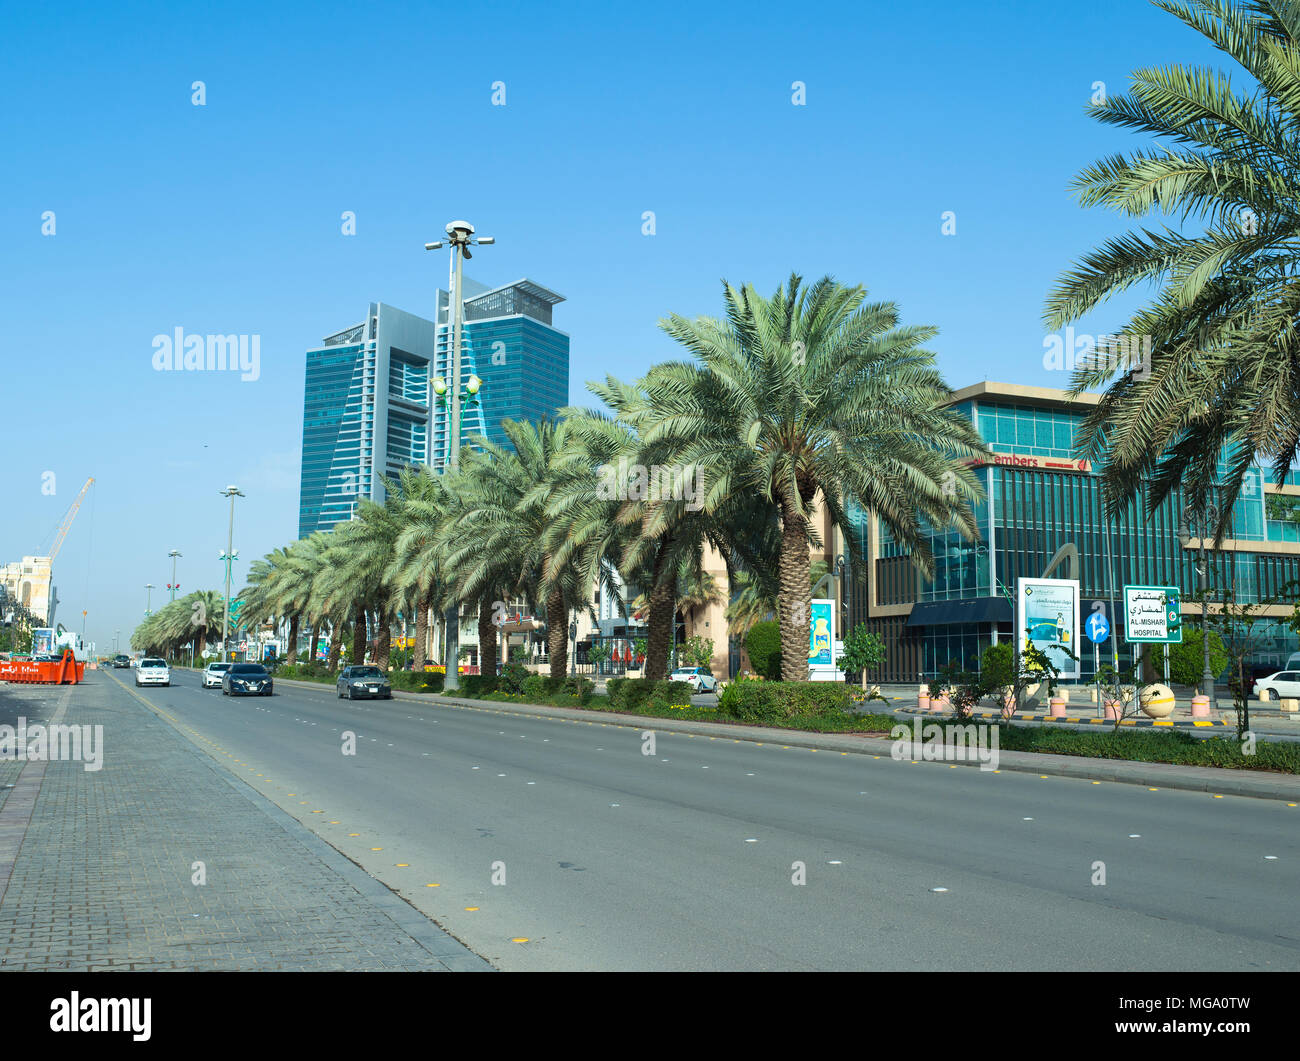 Light Traffic on Tahlia Street Early in The Morning Caused By Mandatory Re-routings as Part of Metro Construction Project In Riyadh, Saudi Arabia, 26- Stock Photo